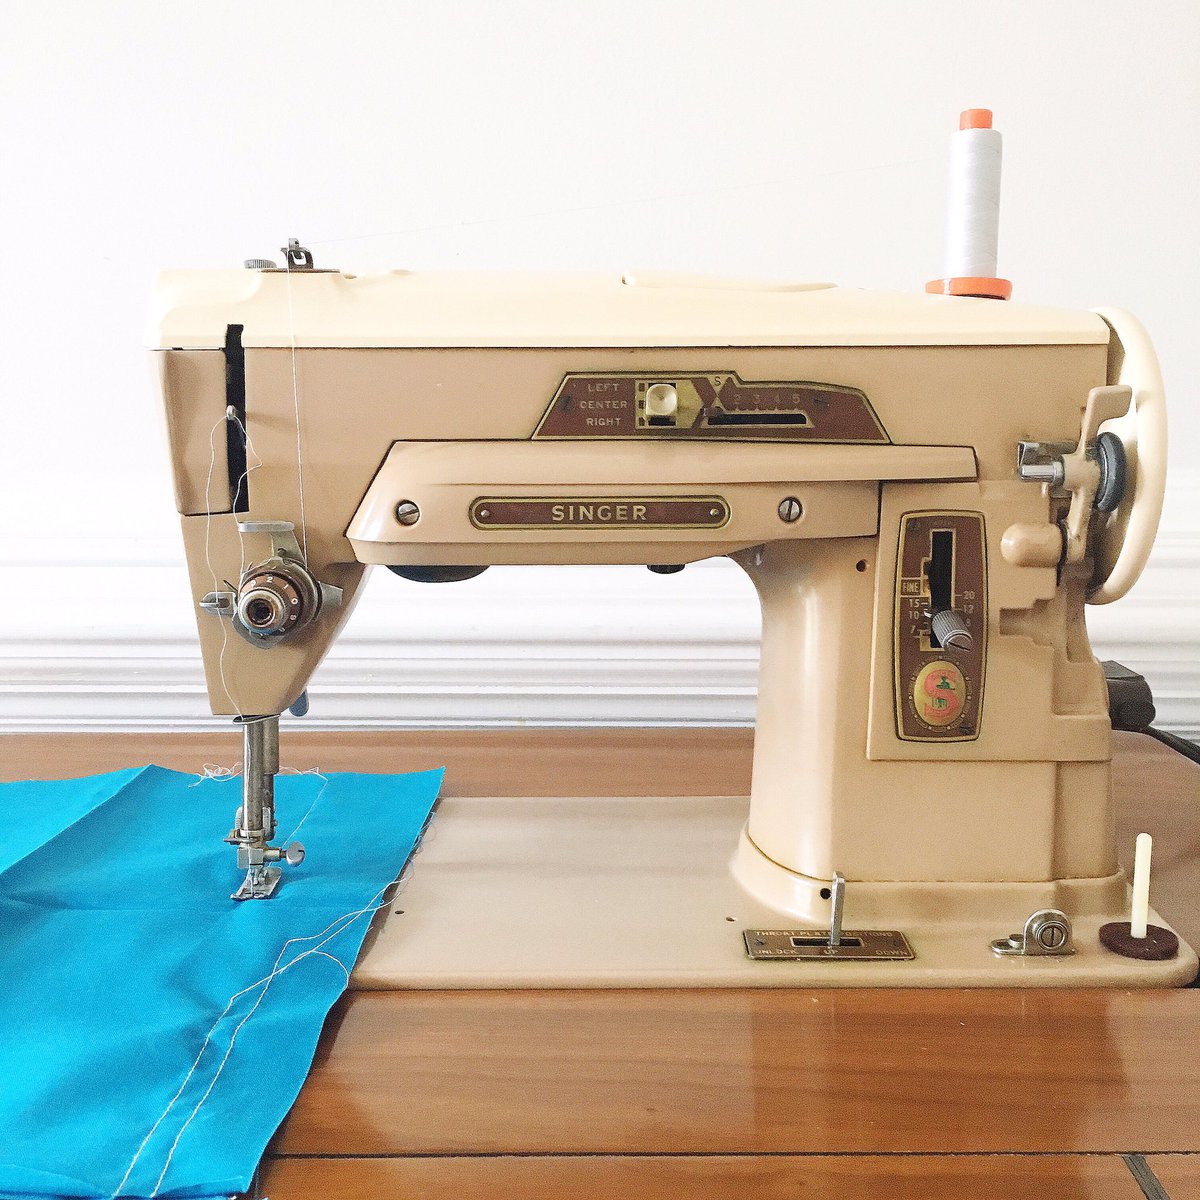 Understanding The Vintage Sewing Pattern - Sewing Method  Sewing machine  accessories, Antique sewing machines, Sewing items